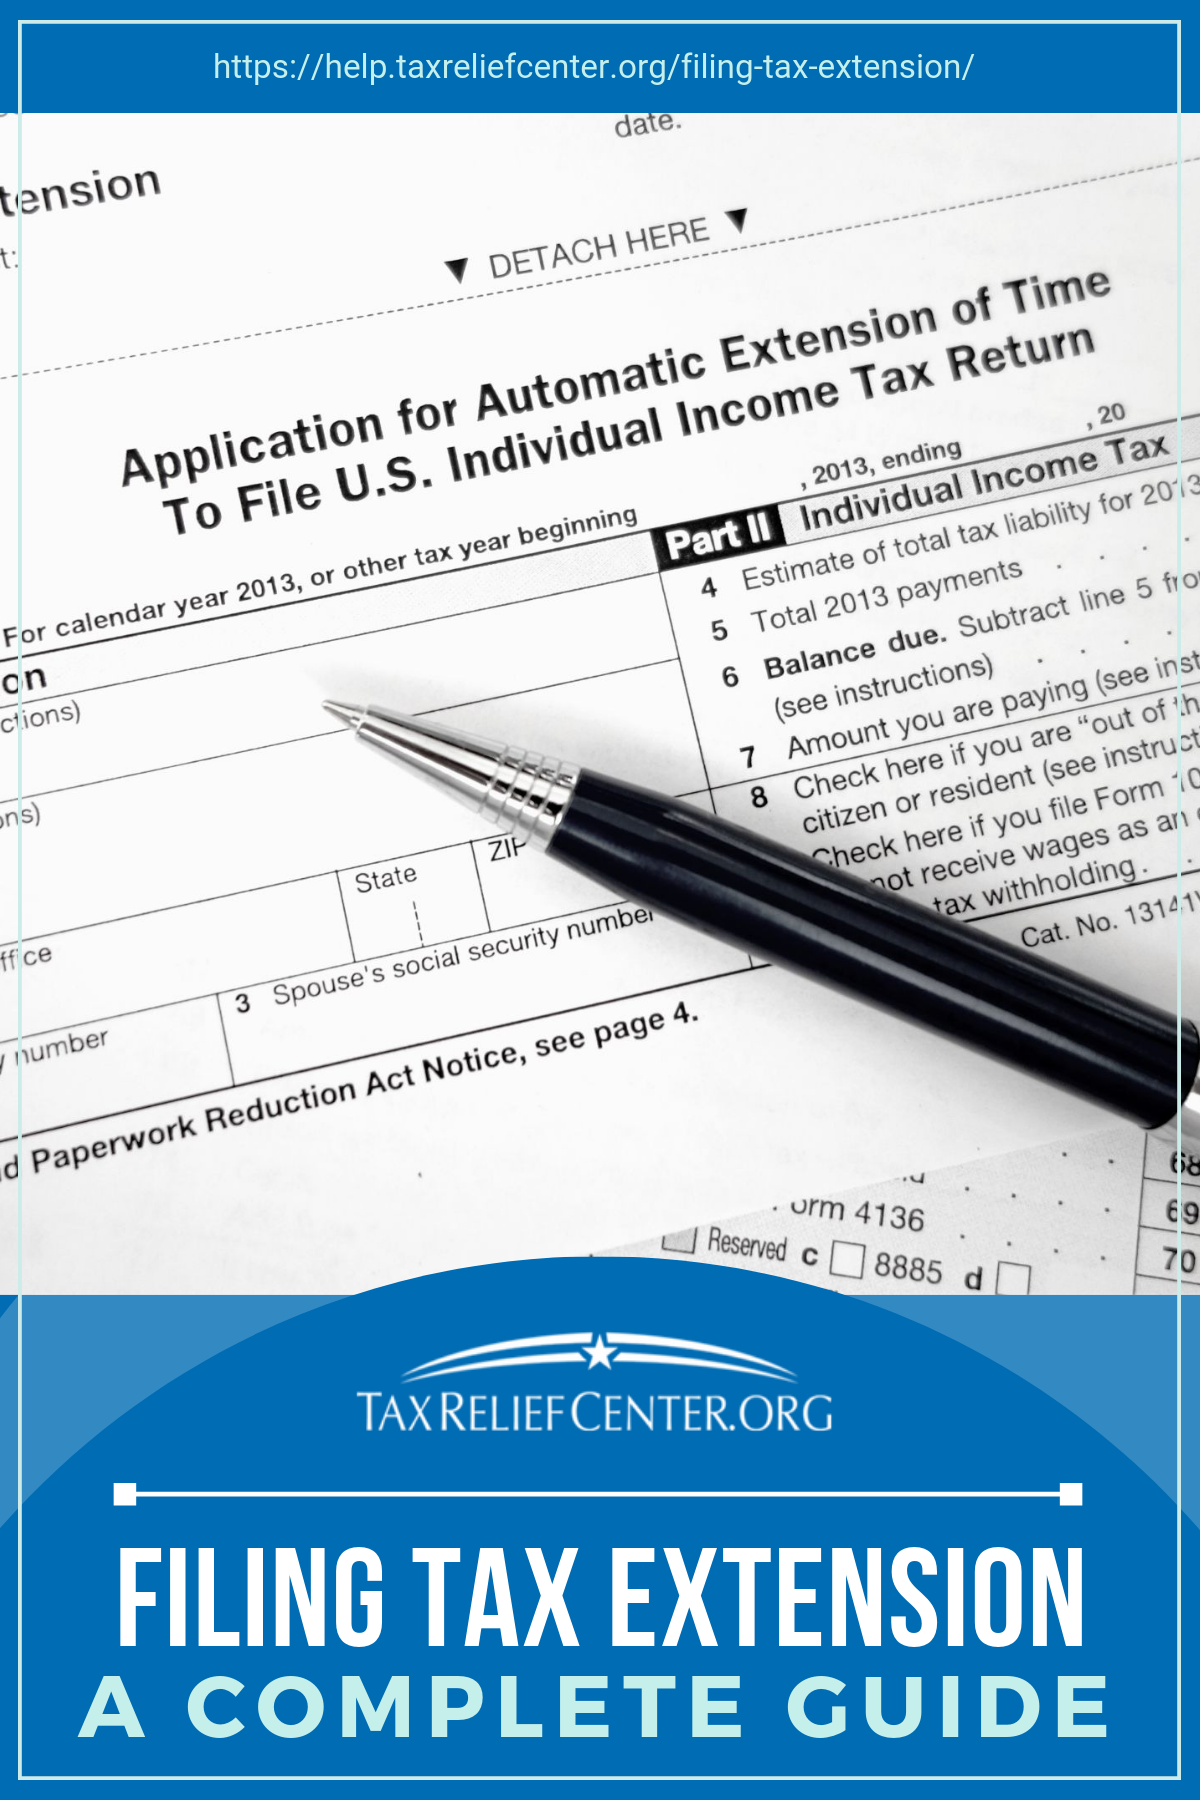 Filing Tax Extension | A Complete Guide [INFOGRAPHIC] https://help.taxreliefcenter.org/filing-tax-extension/